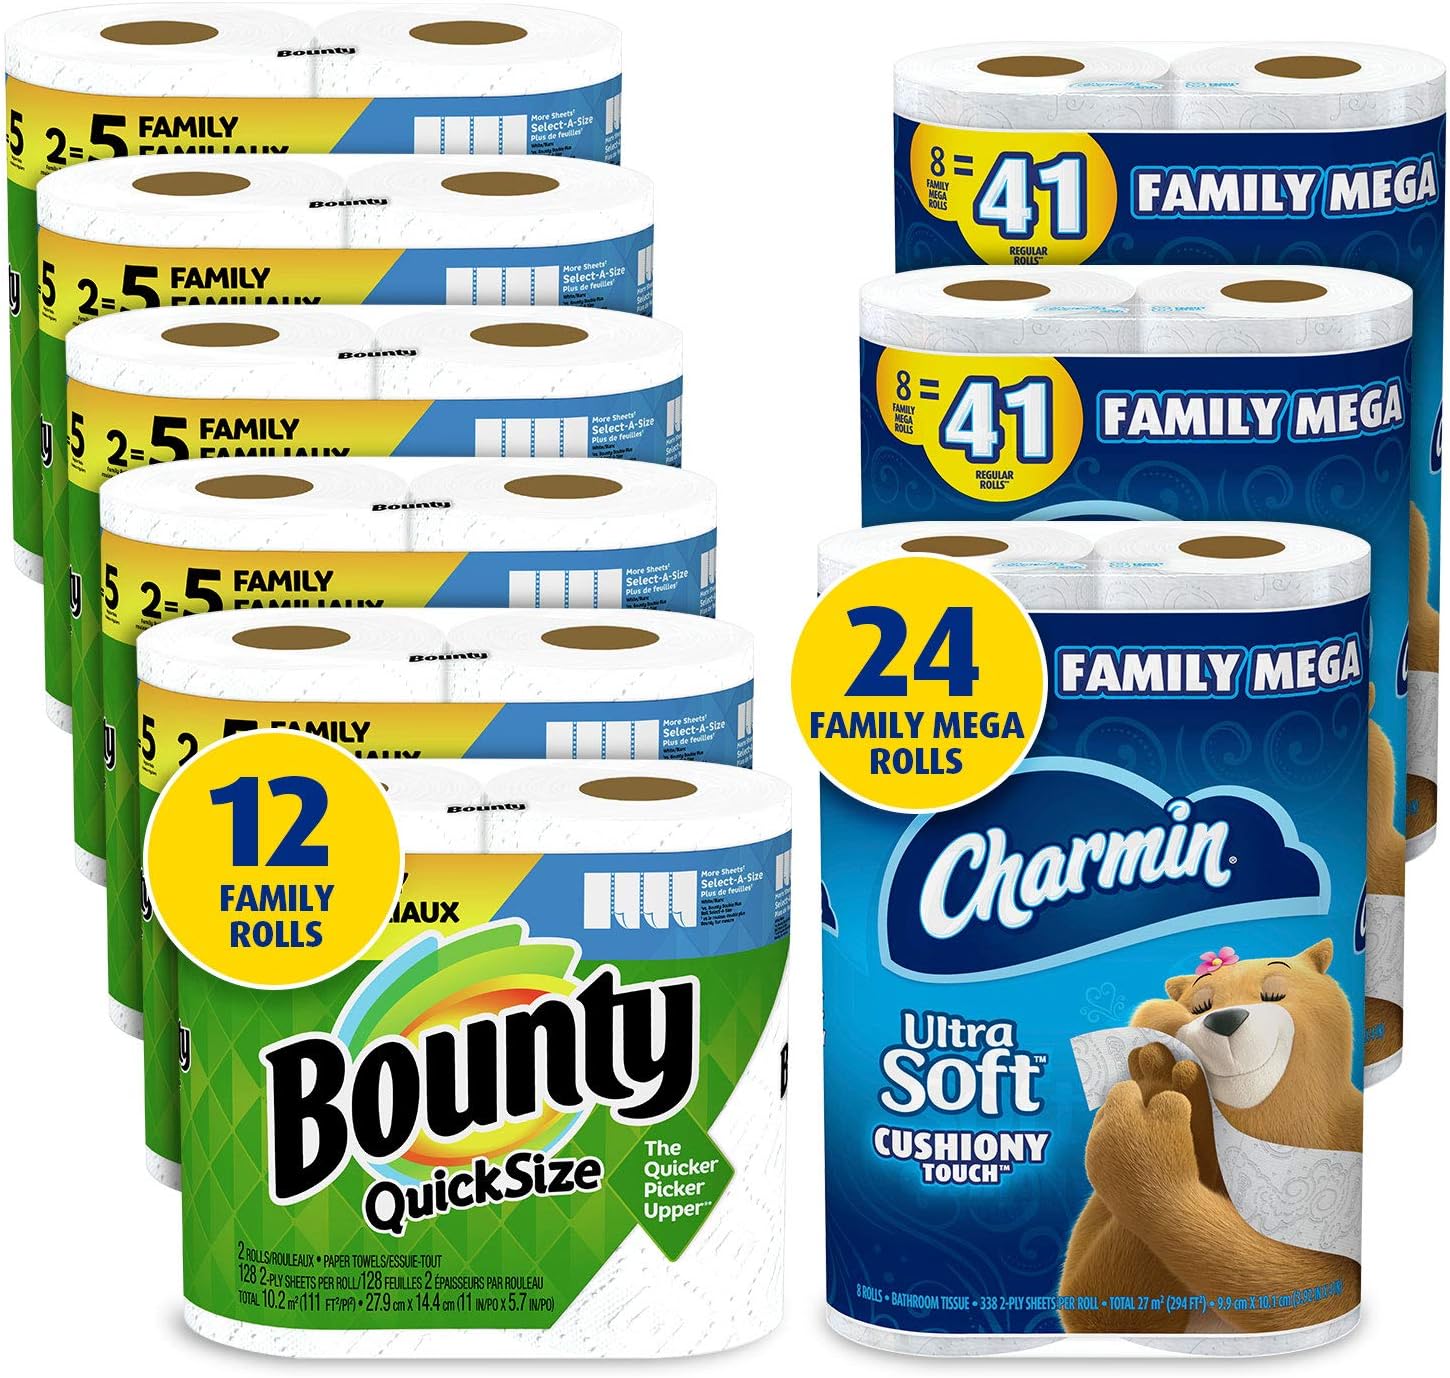 https://discounttoday.net/wp-content/uploads/2023/06/Charmin-Ultra-Soft-Cushiony-Touch-Toilet-Paper-24-Family-Mega-Rolls-and-Bounty-Quick-Size-Paper-Towels12-Family-Rolls-Bundle.jpg